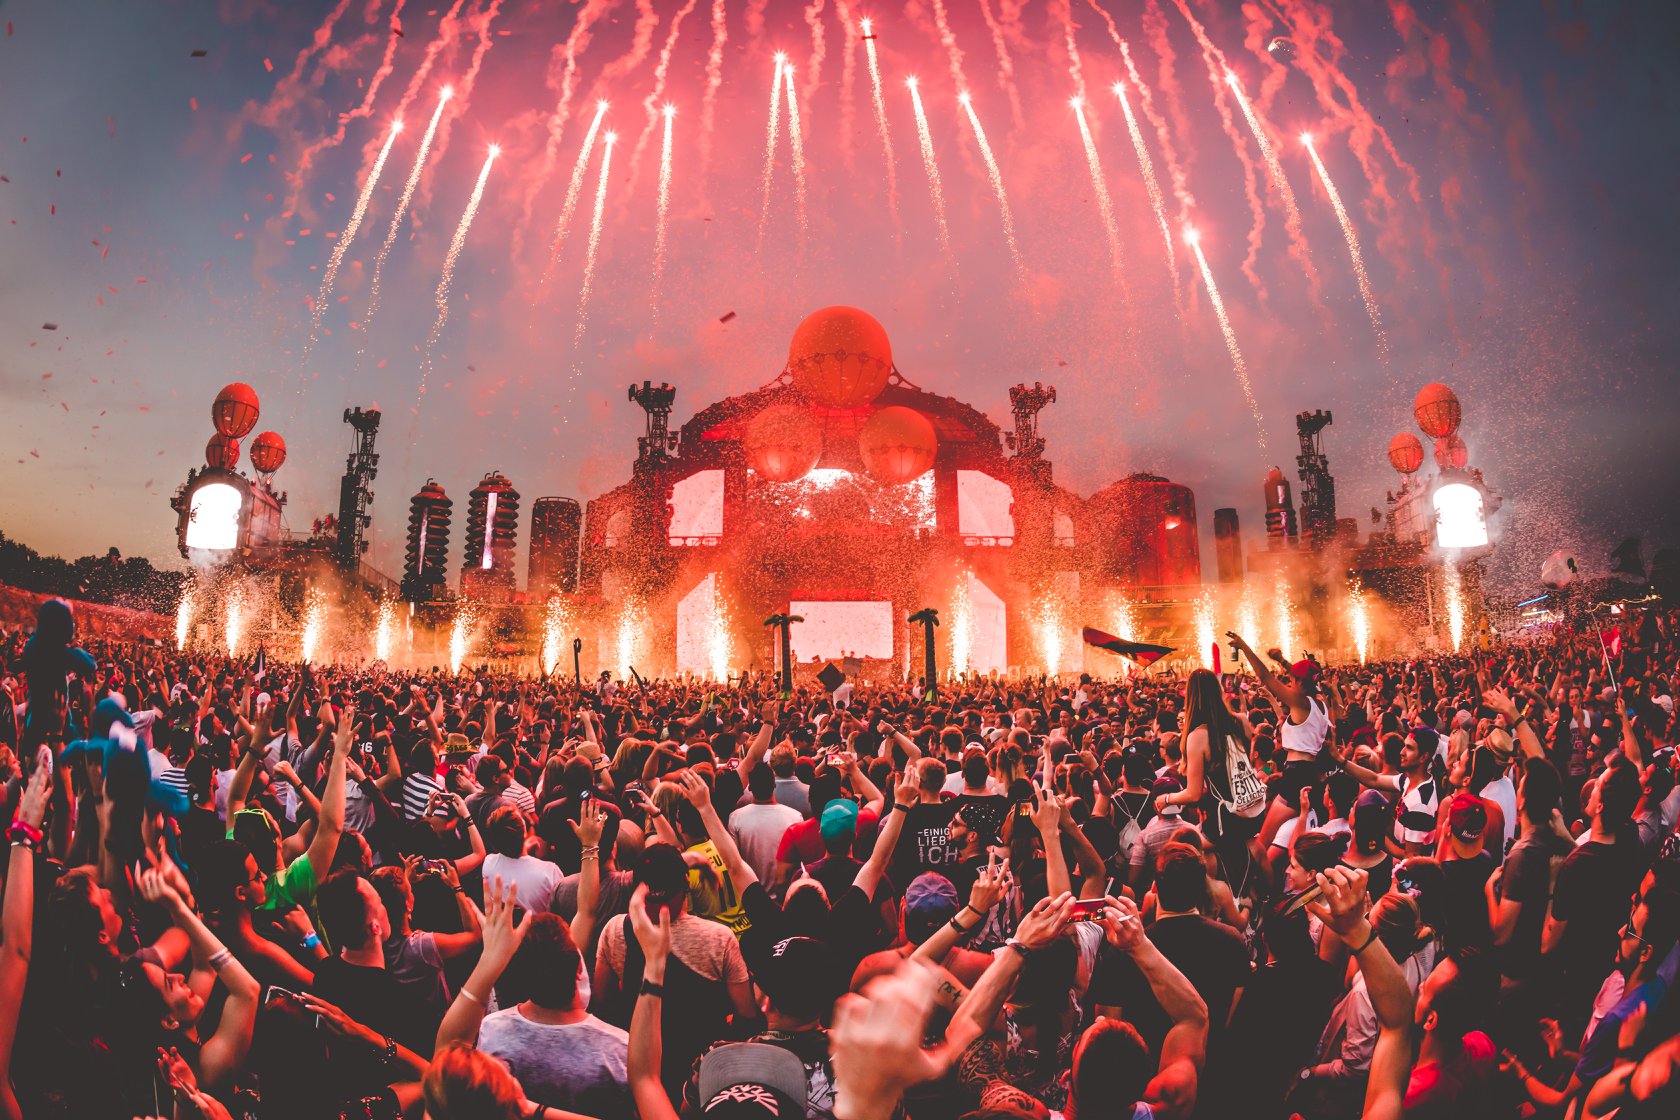 PAROOKAVILLE 2021 Edition Moved to 2022 | The Nocturnal Times